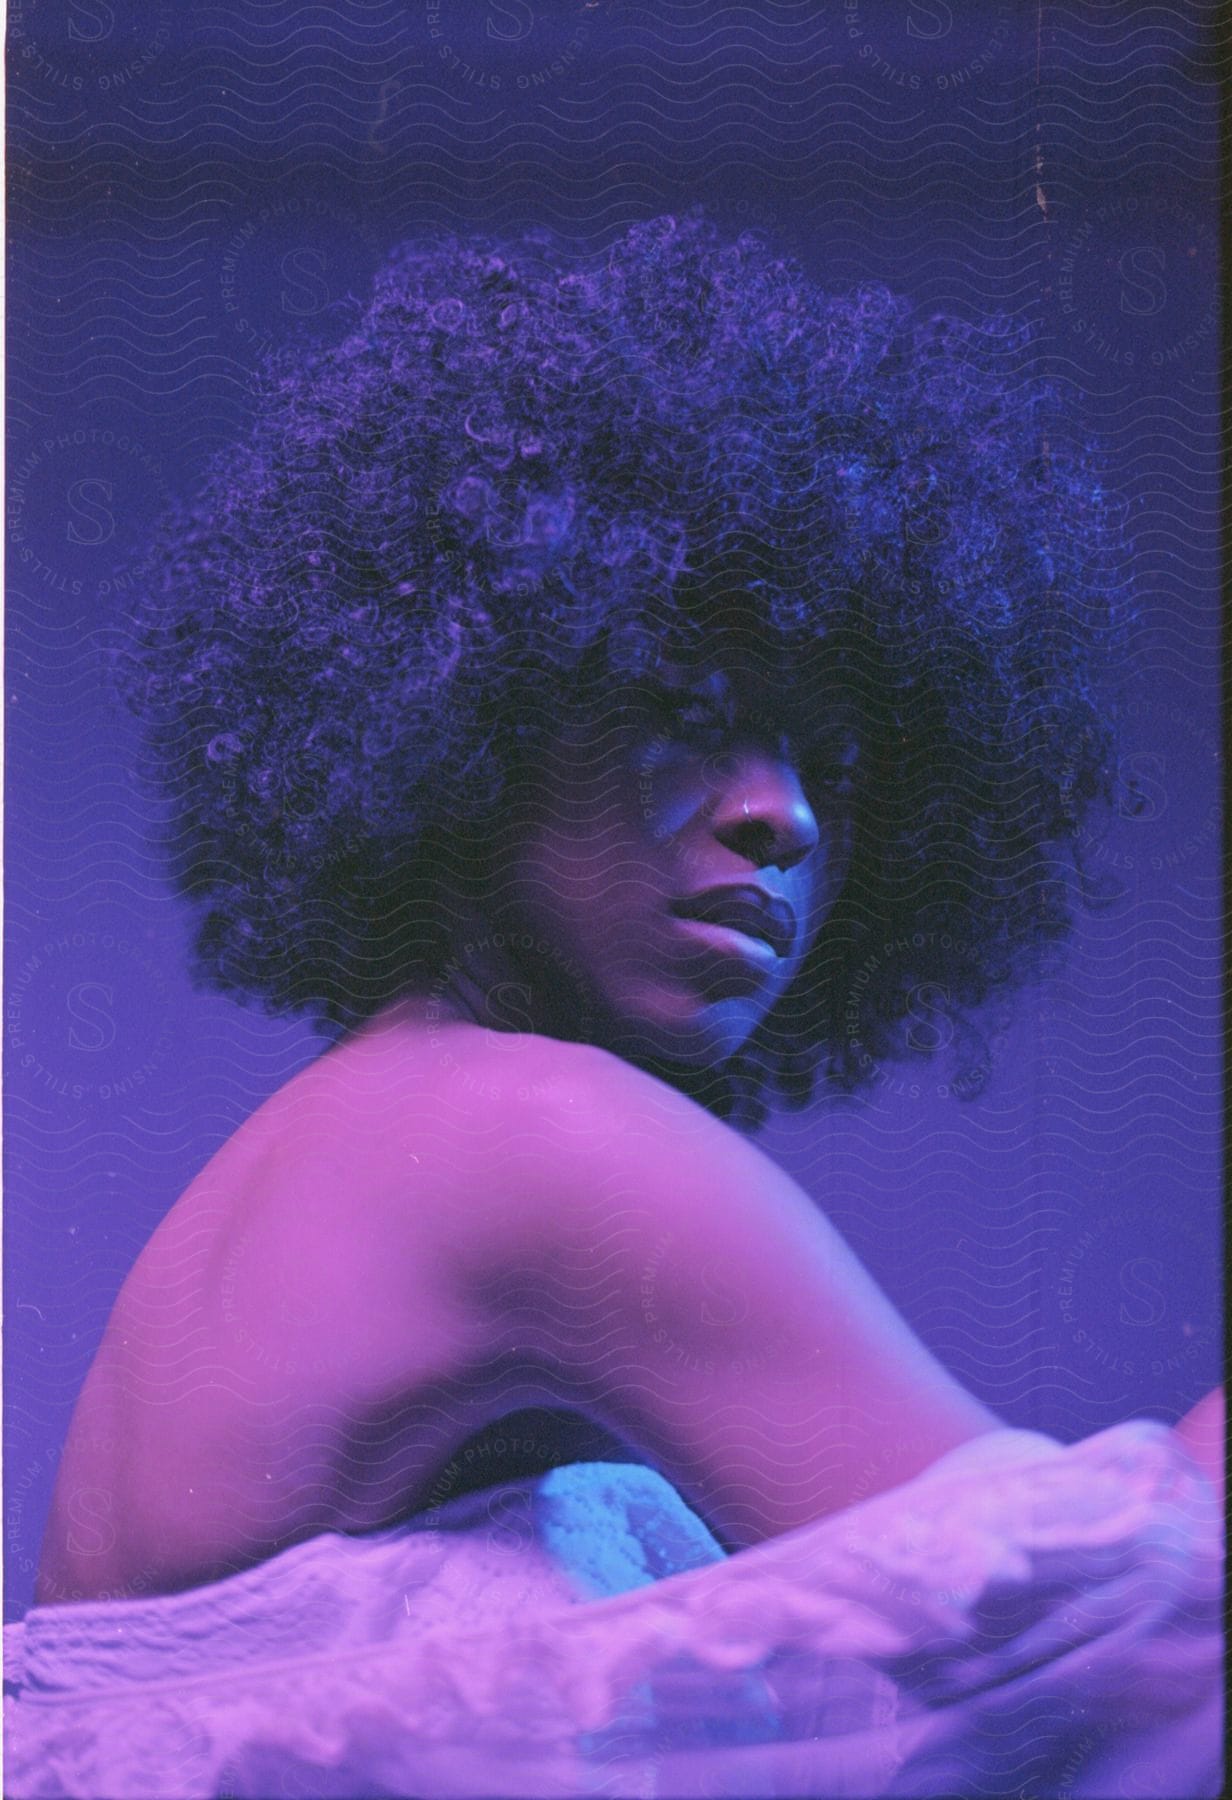 A black woman with an afro hairstyle under blue and pink lights